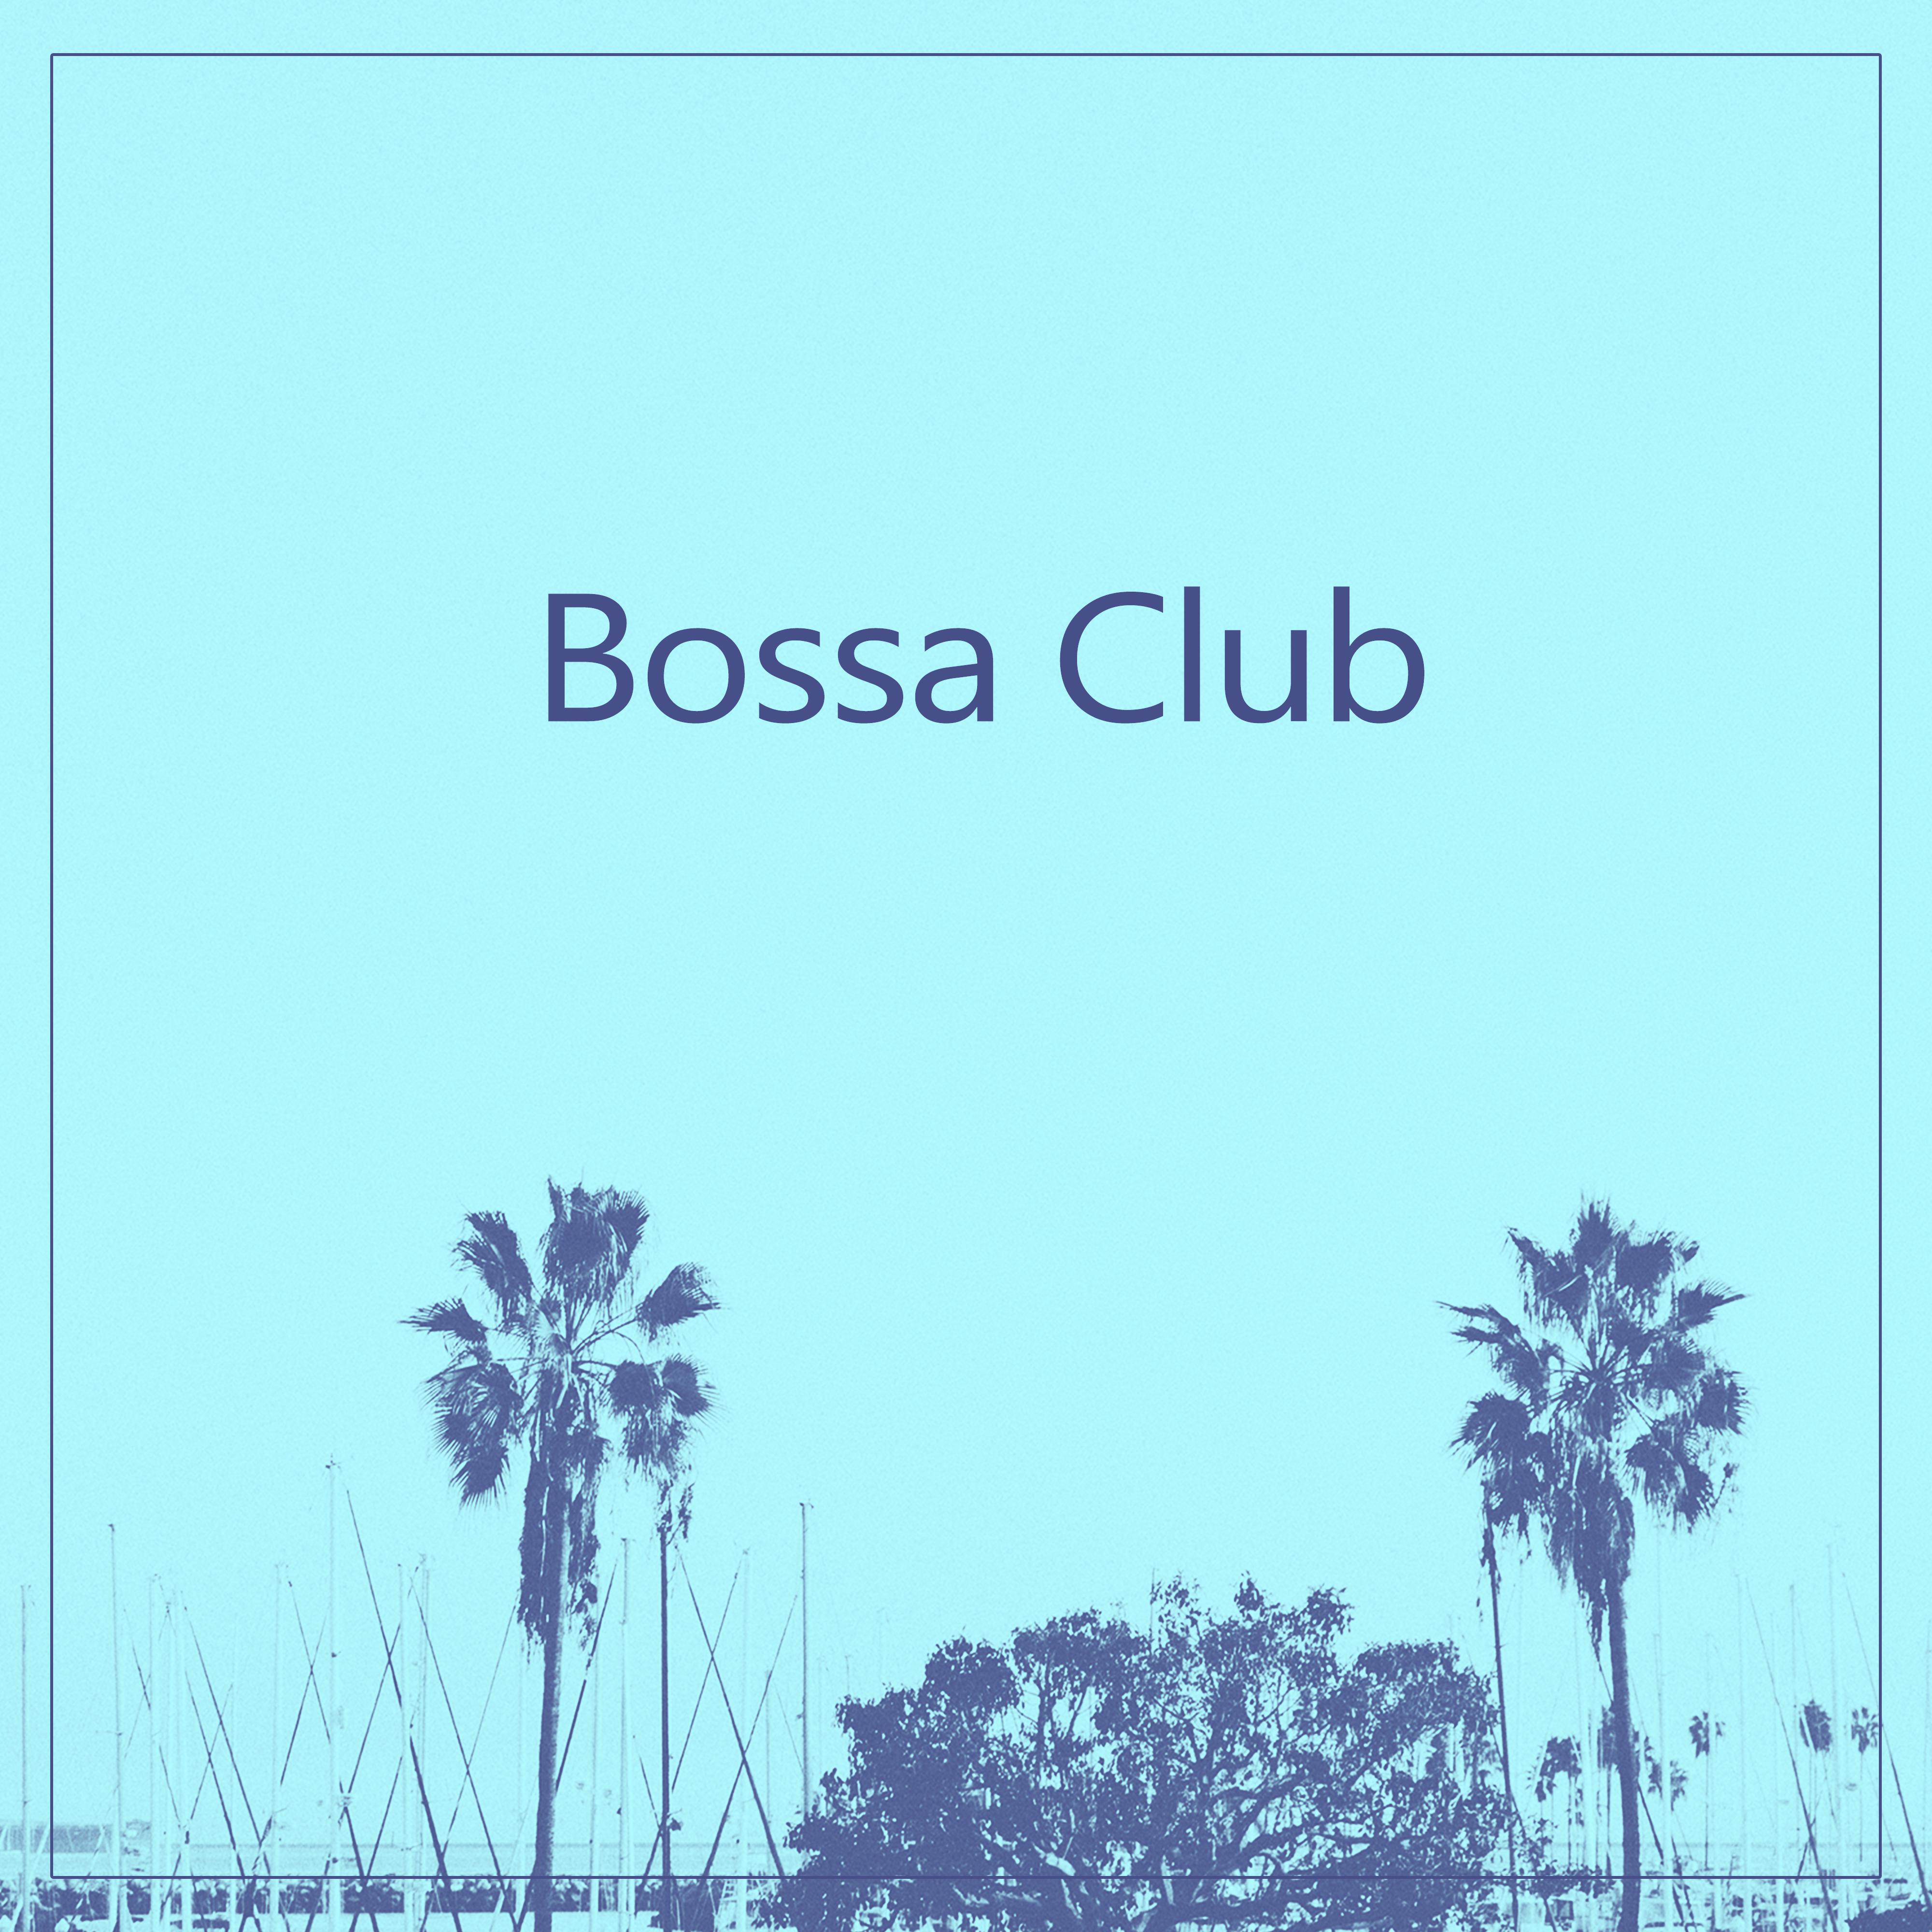 Bossa Club - Summer Time Chill Out, Party Chill Out Club, Riviera Chillout